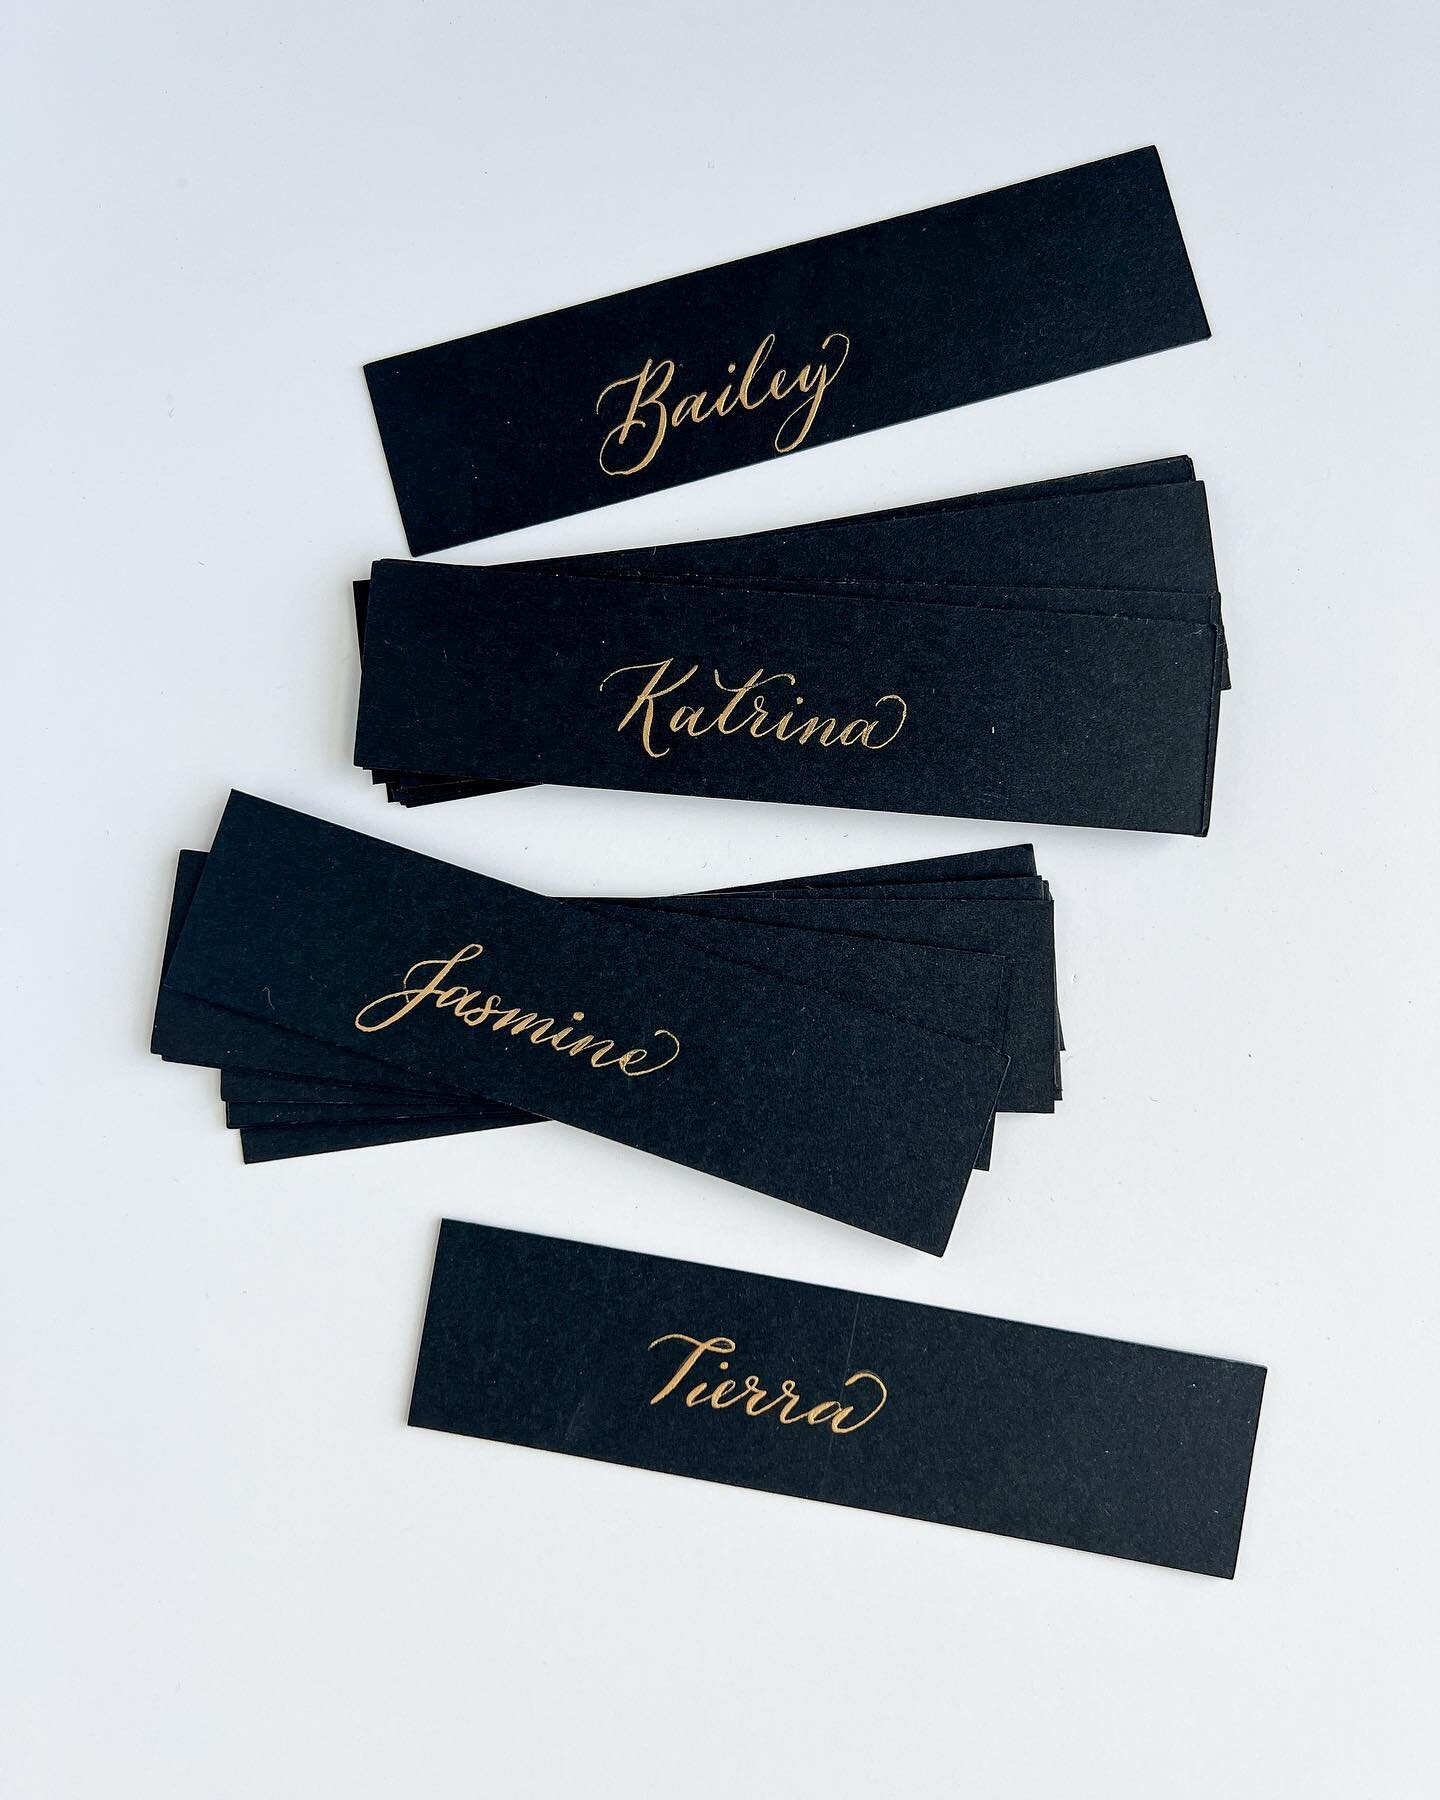 You need place cards for your next event!

Ever wondered if you needed place cards for your event? Maybe you&rsquo;ve questioned if they&rsquo;re even useful? The answer is Yes to both! Let&rsquo;s discuss!
Place cards (also known as name cards) indi